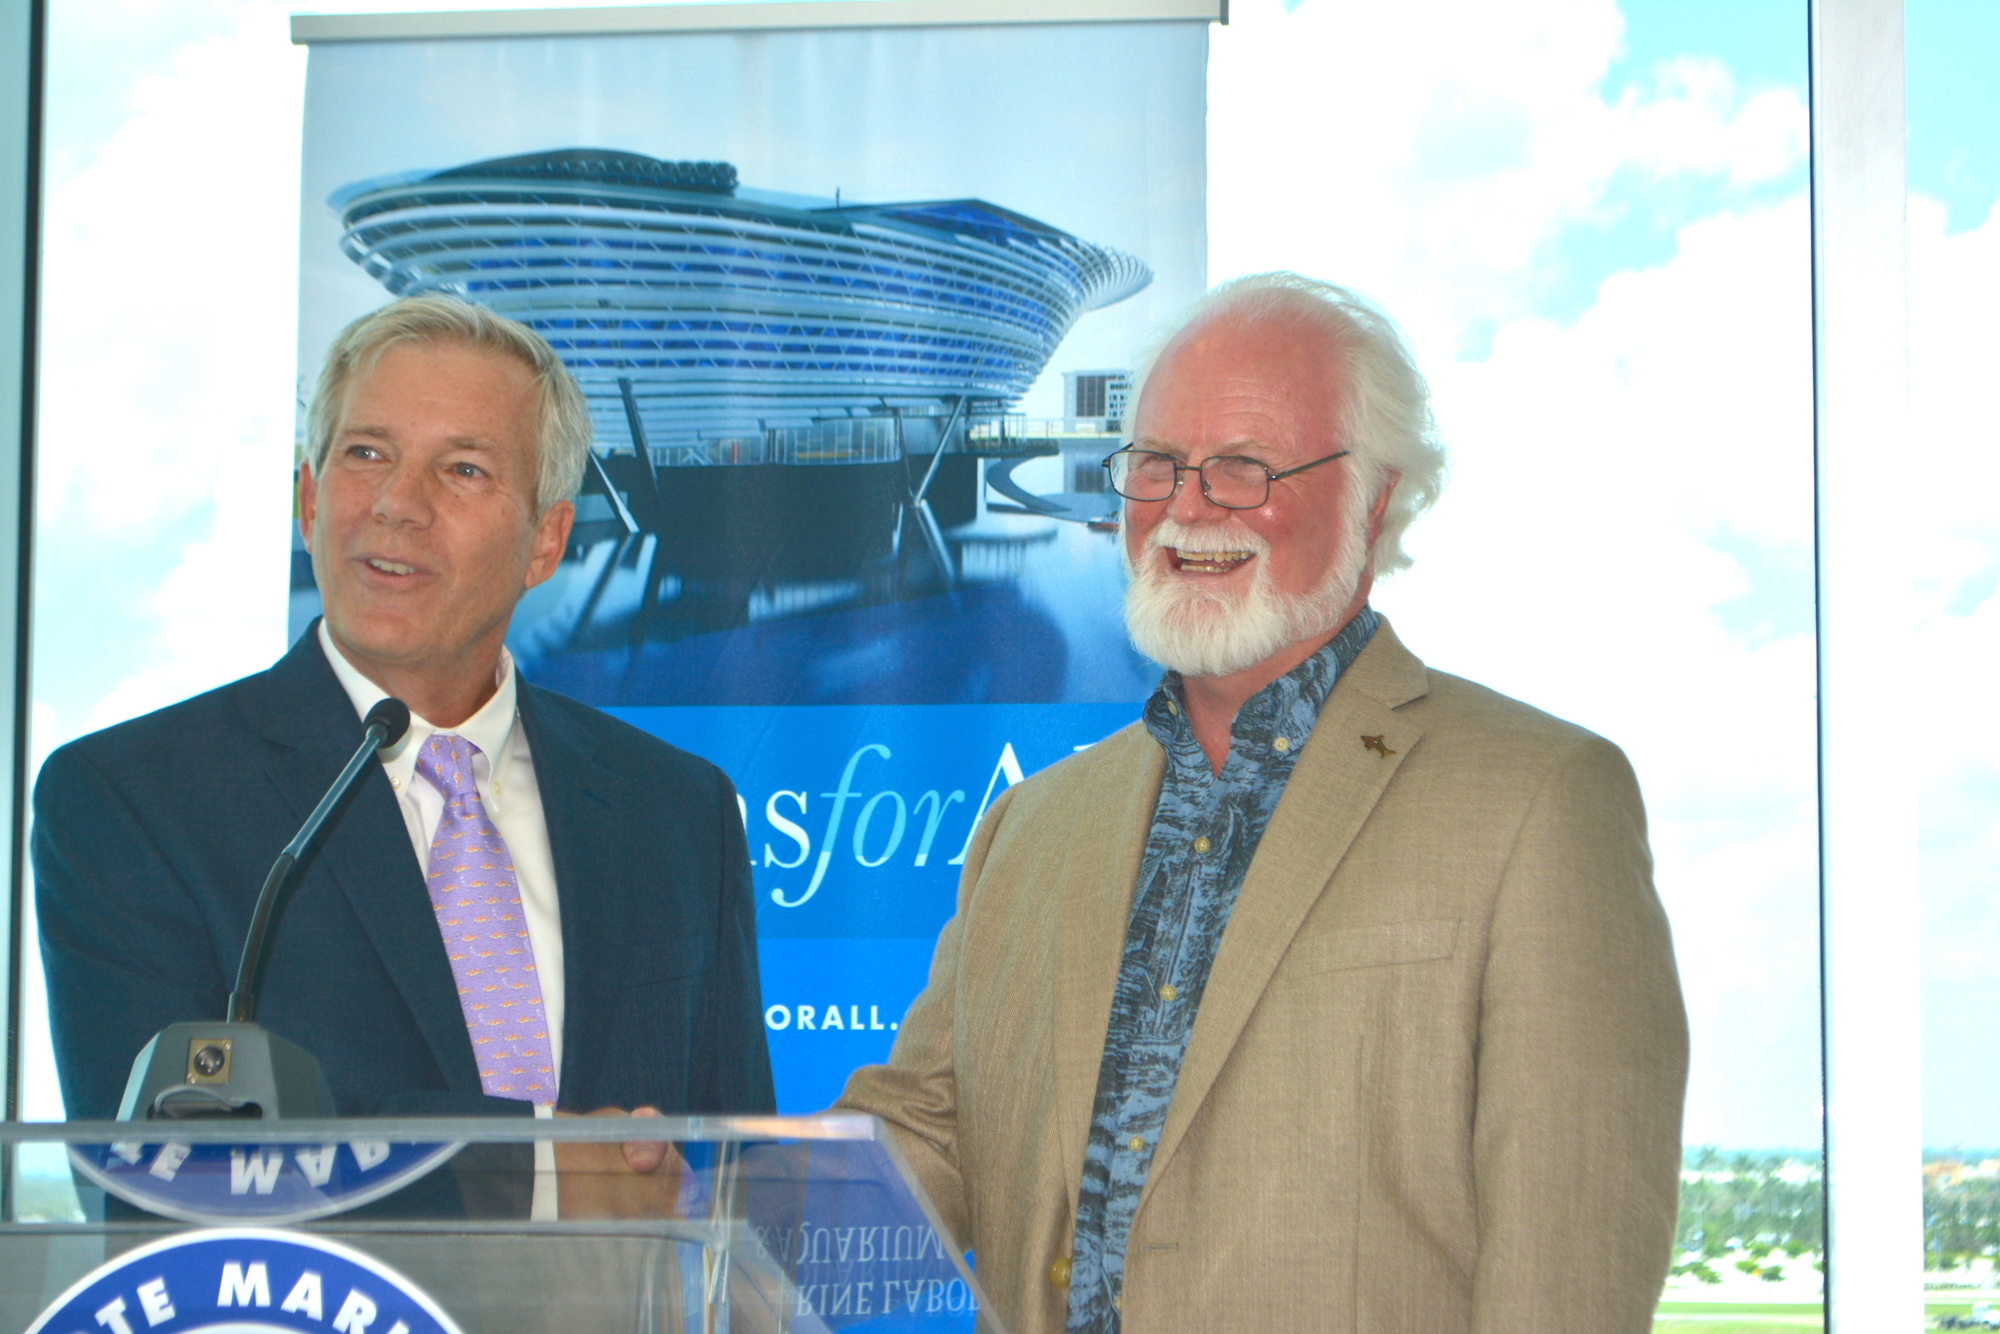 Willis Smith owner and CEO David Sessions and Mote President and CEO Michael Crosby talk about the plans for the Mote Science Education Aquarium in 2020.